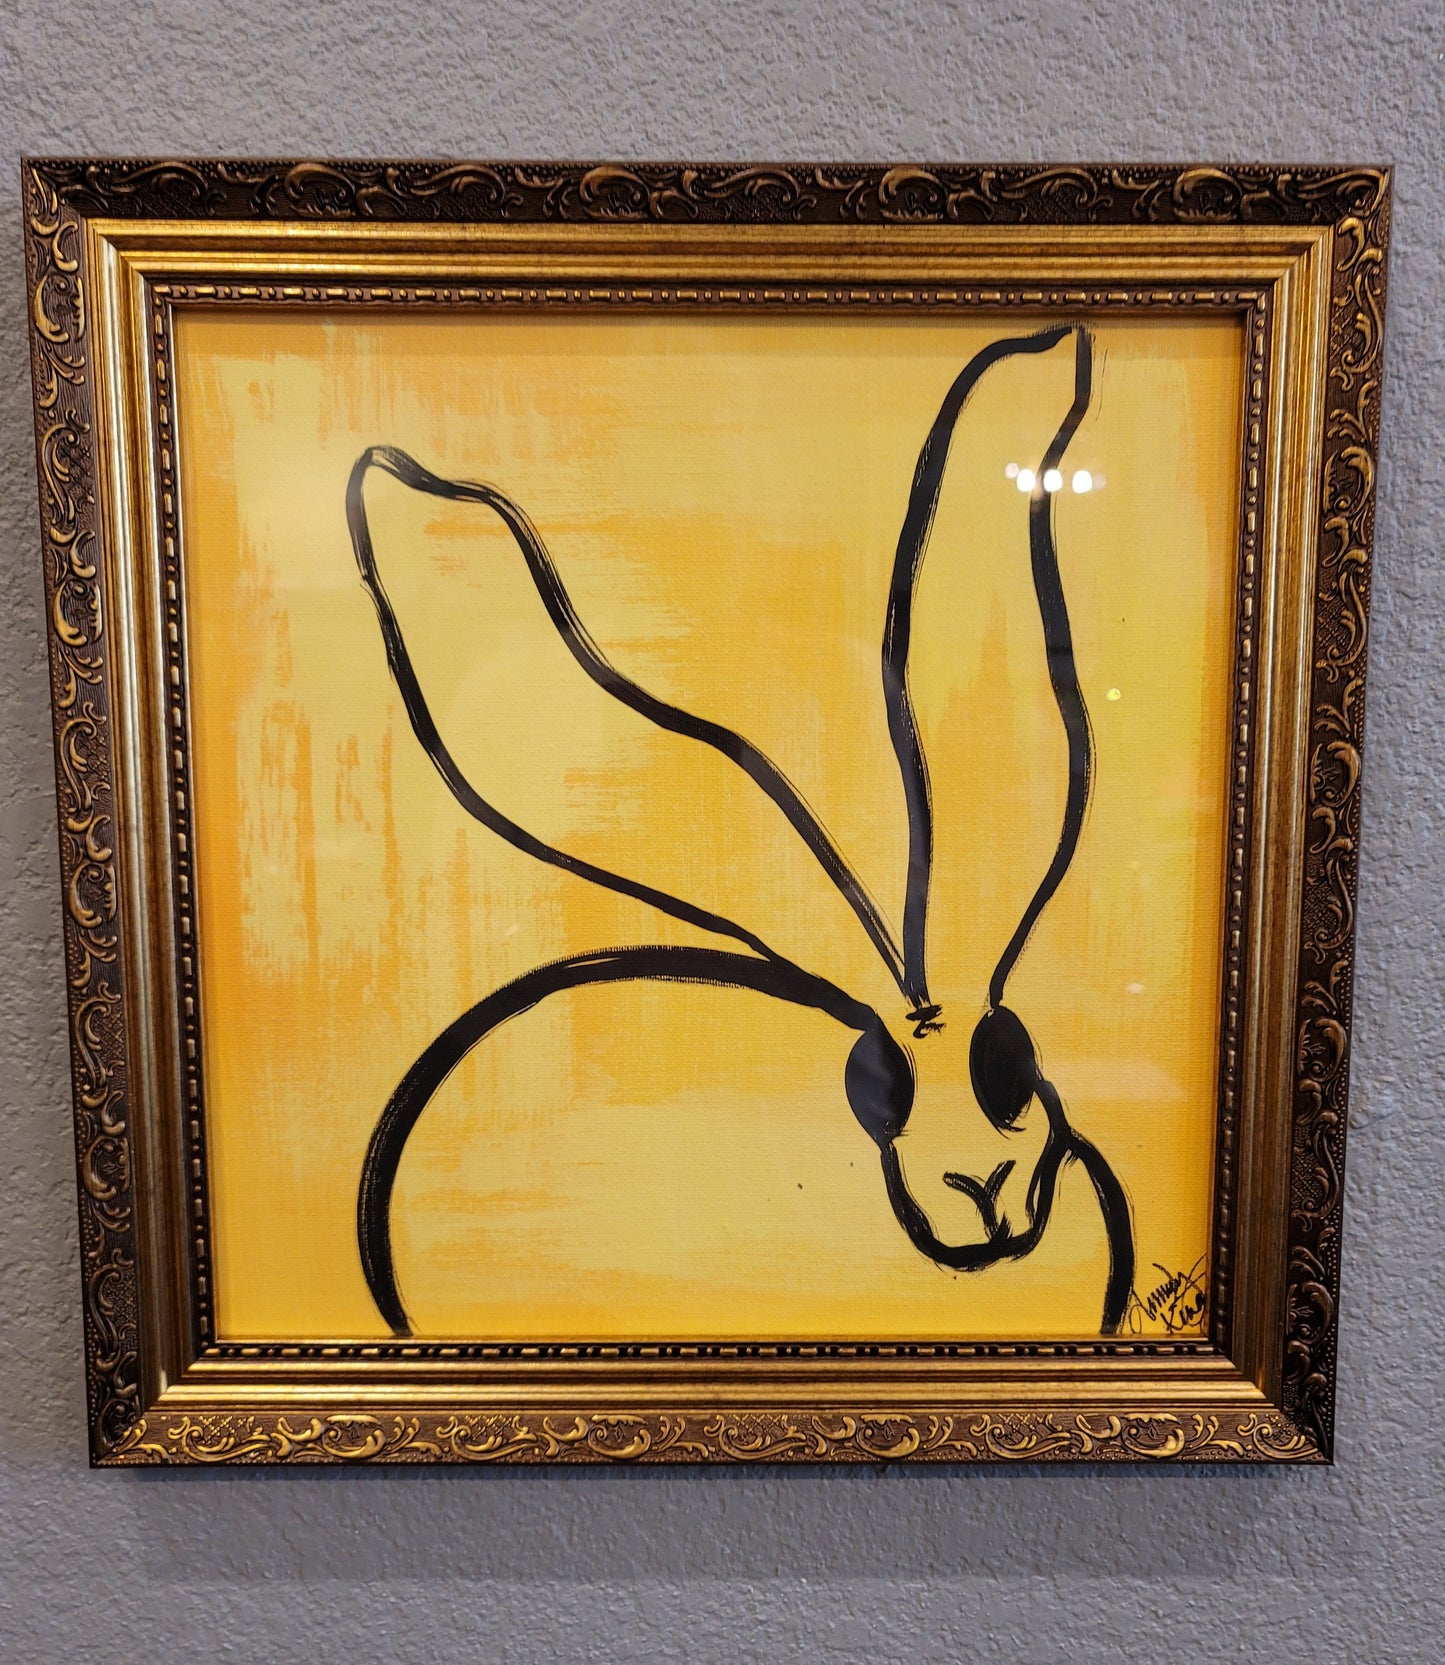 FRAMED BUNNY PICTURE